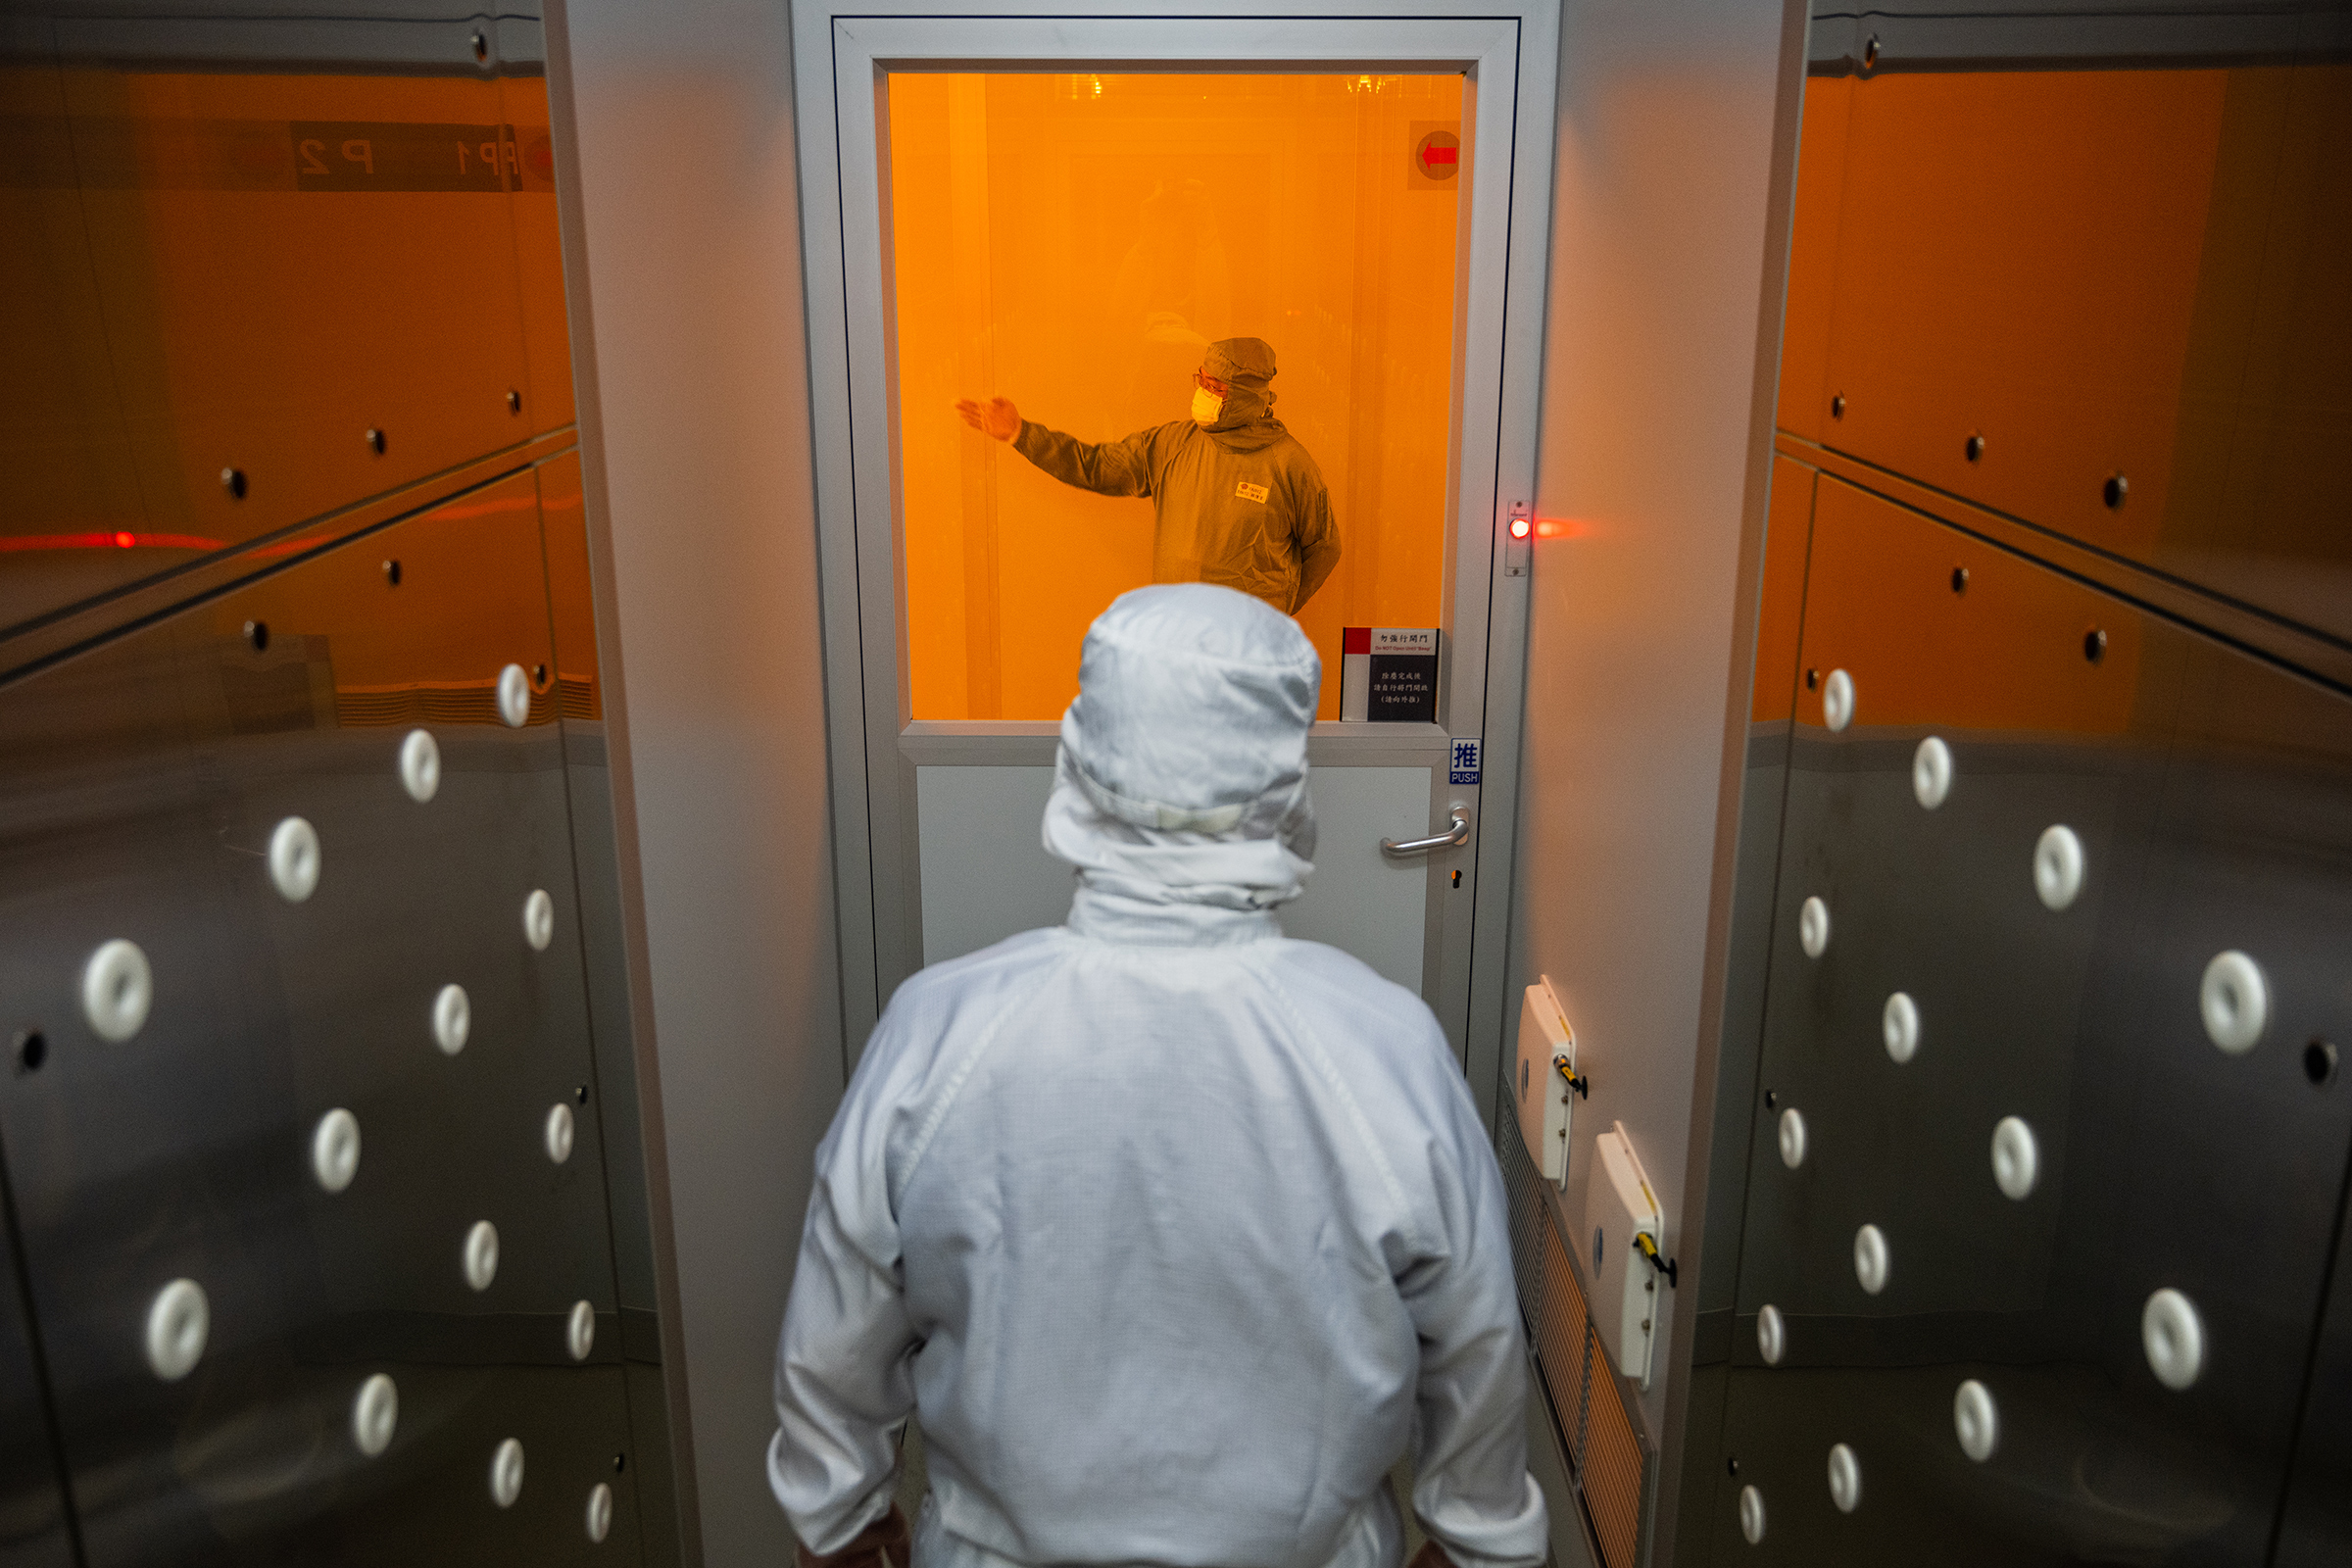 A worker enters a “clean room” at <a href="https://time.com/6102879/semiconductor-chip-shortage-tsmc/">chipmaker TSMC’s headquarters</a> in Hsinchu, Taiwan, on Sept. 10. (Billy H.C. Kwok for TIME)